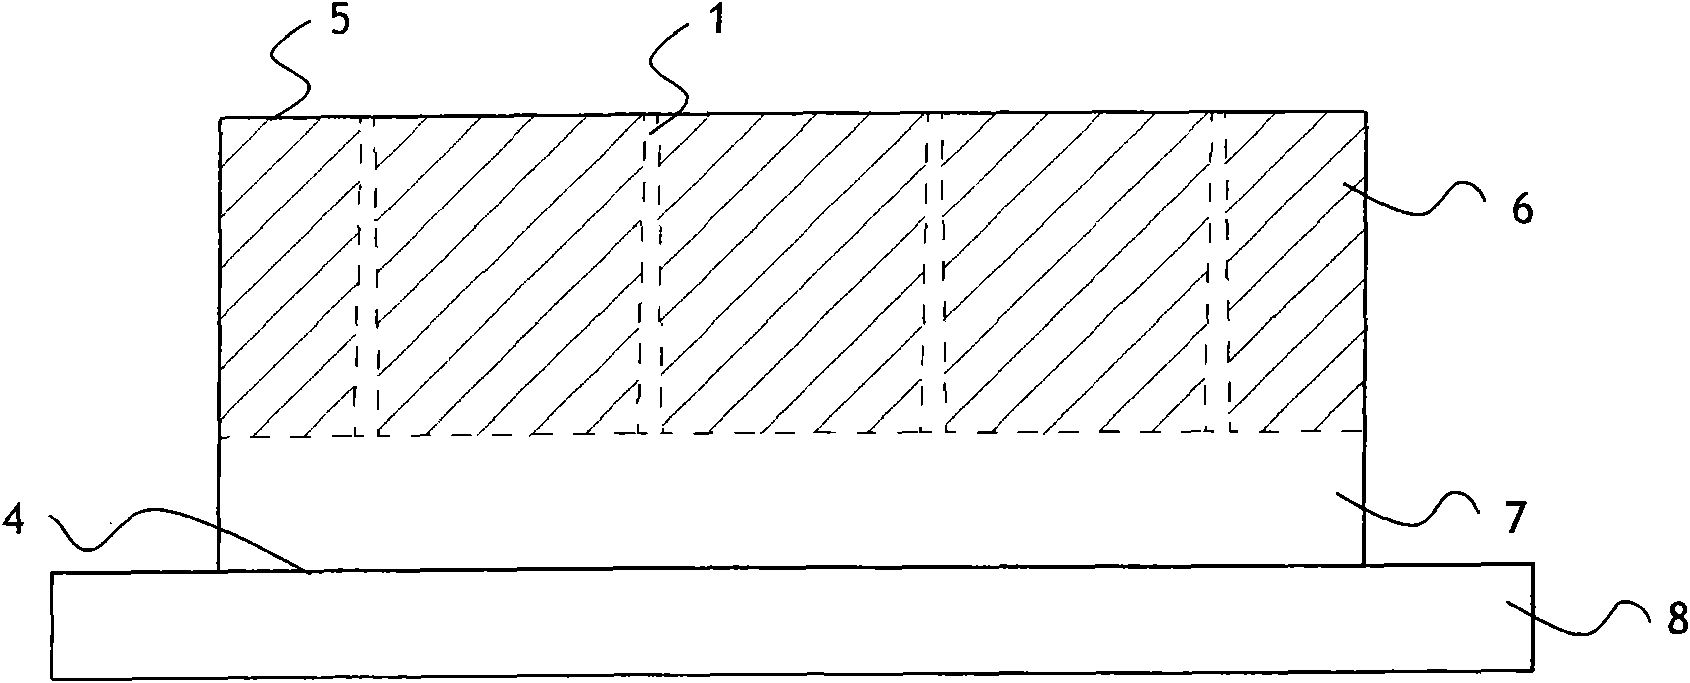 Numerical control machining method for thin-wall copper electrode